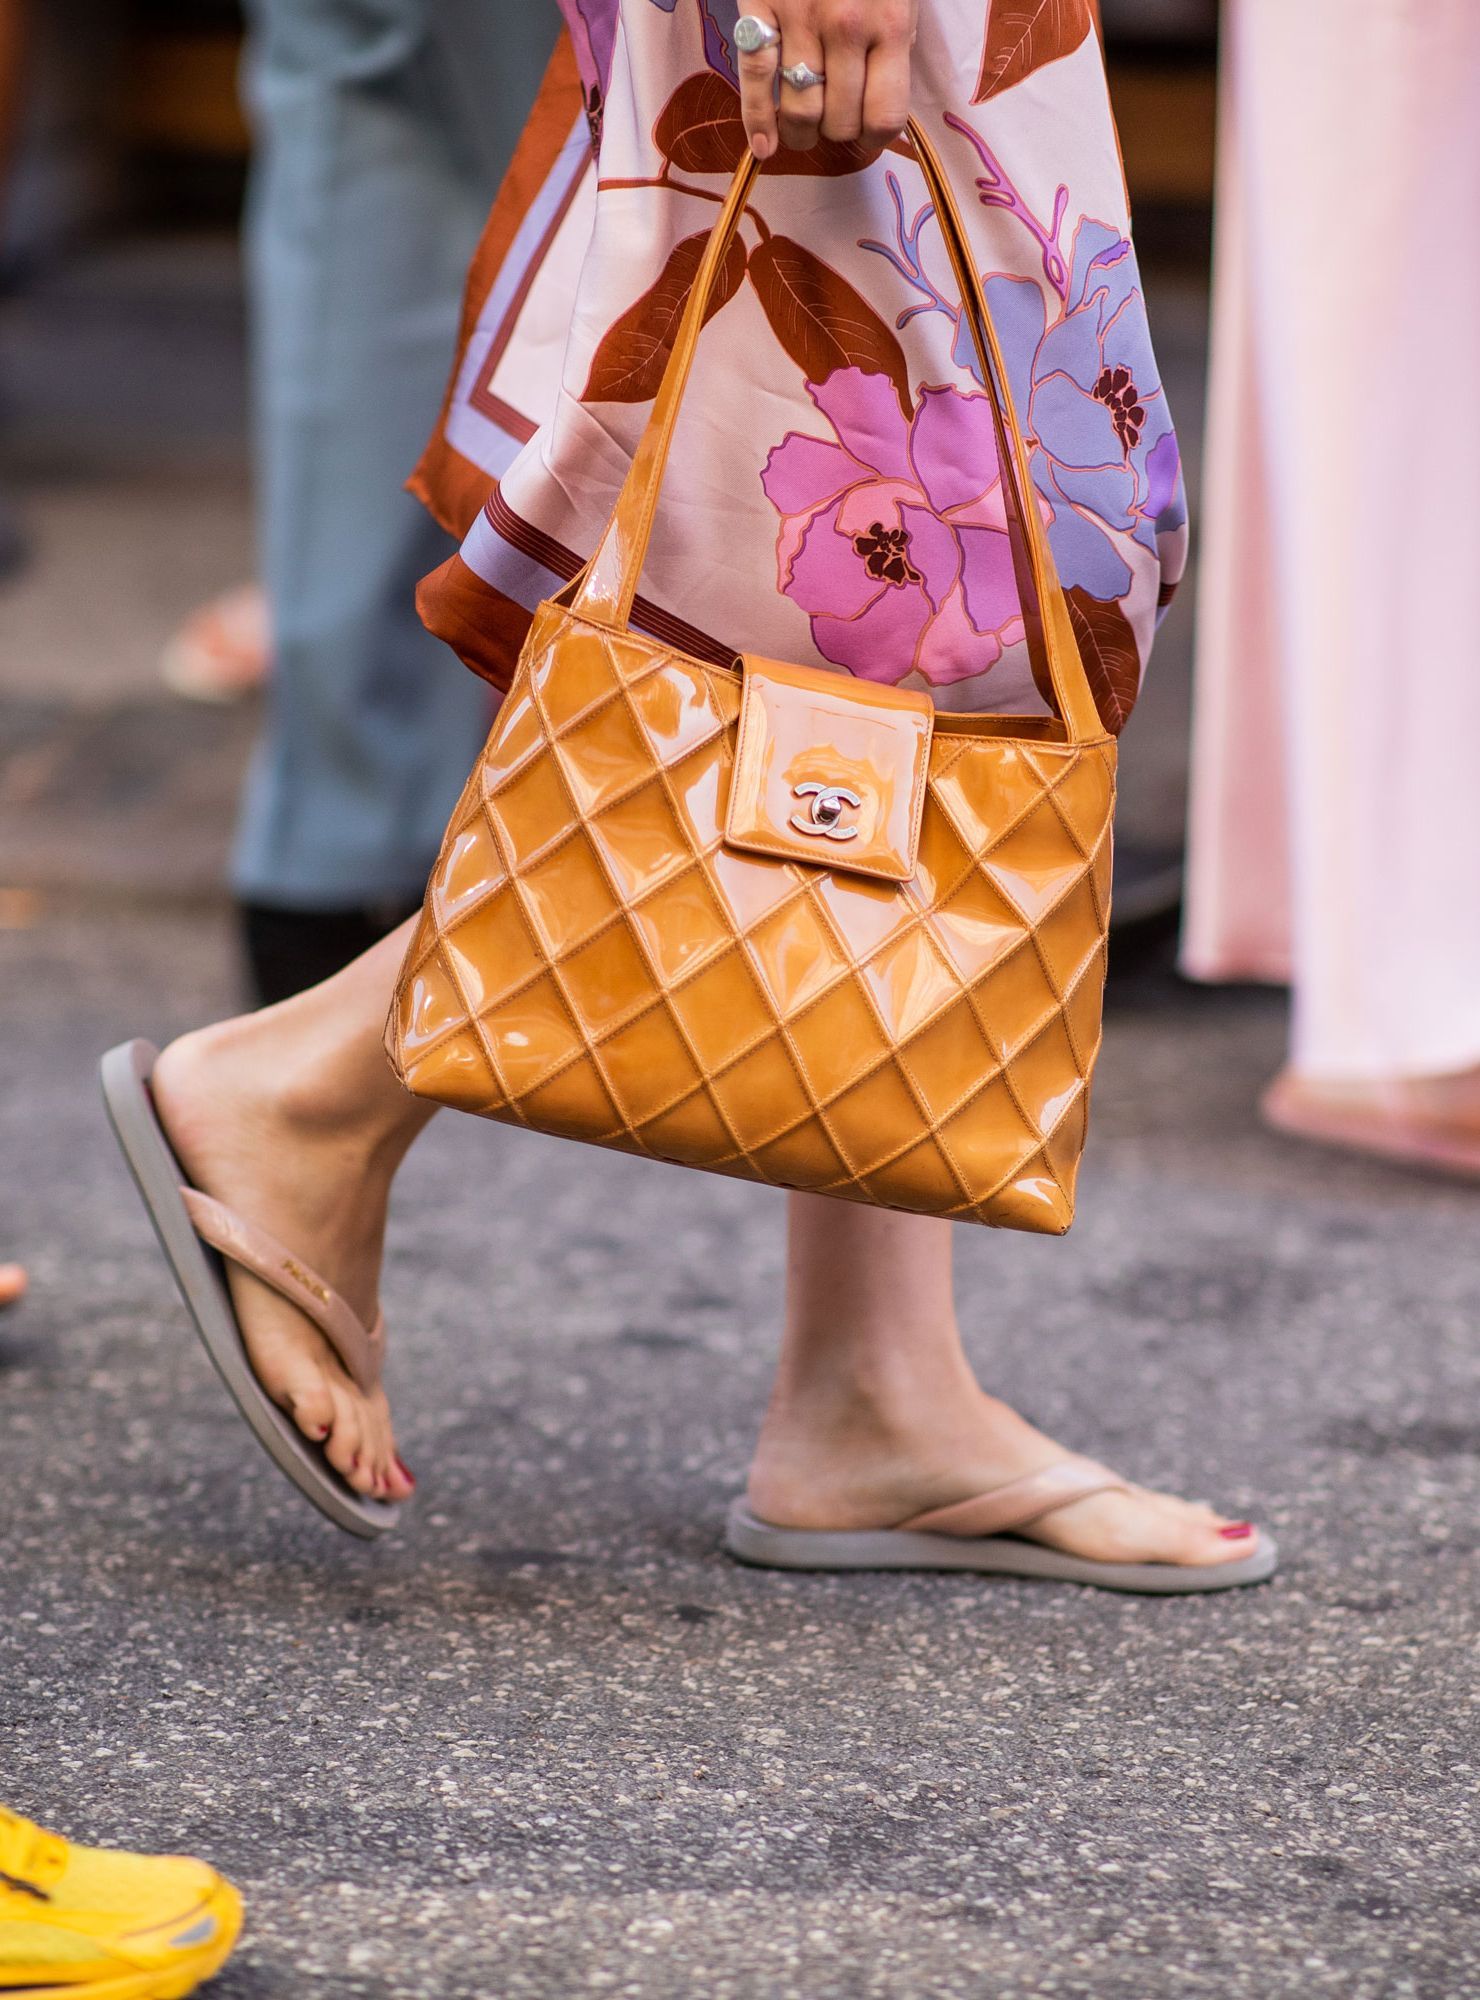 The resurgence of the flip-flop trend 